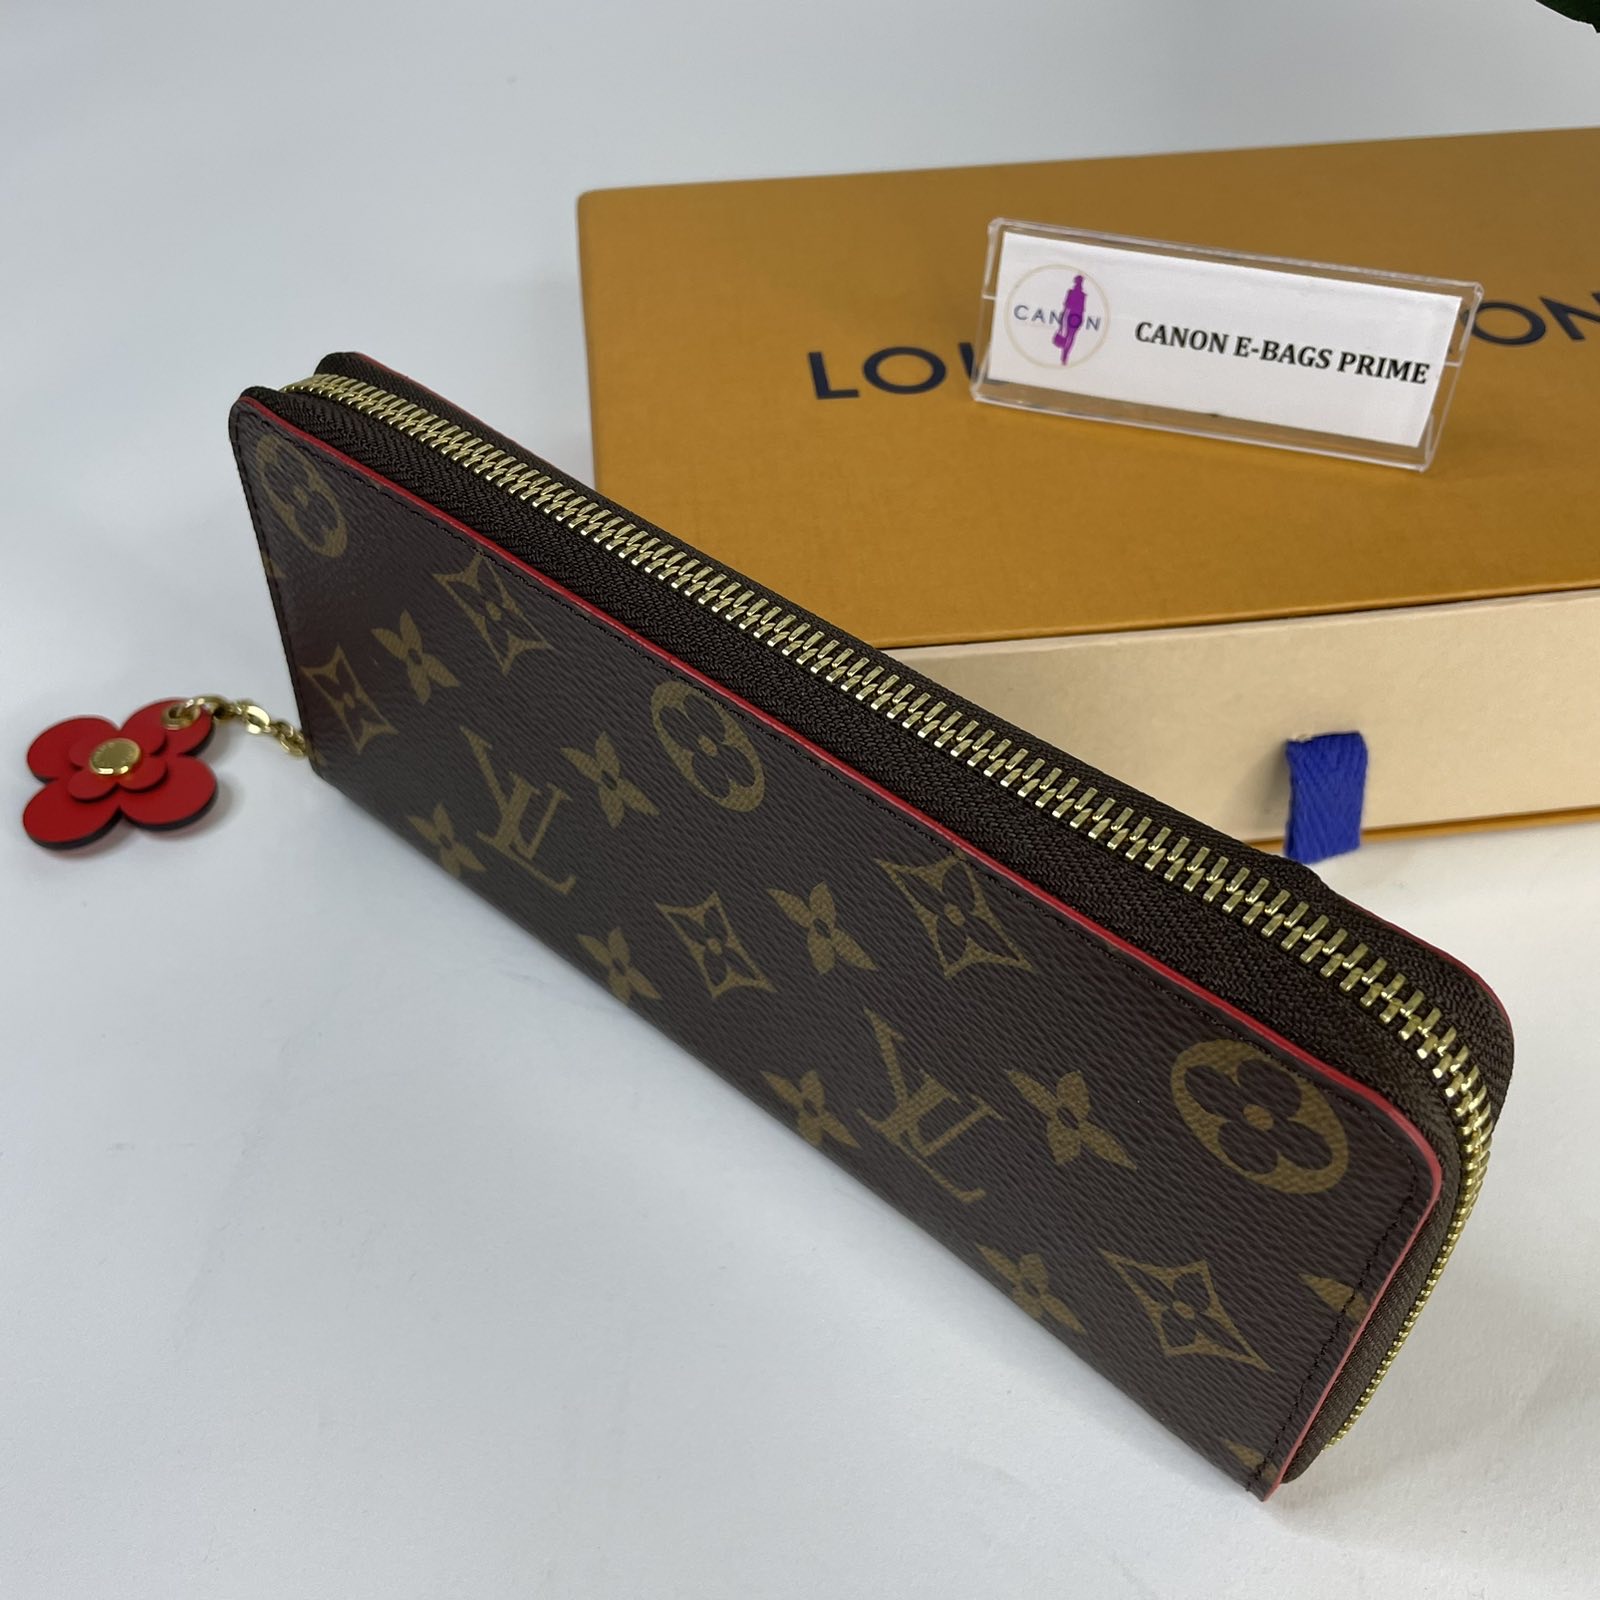 Louis Vuitton Clemence Wallet Limited Edition Bloom Flower